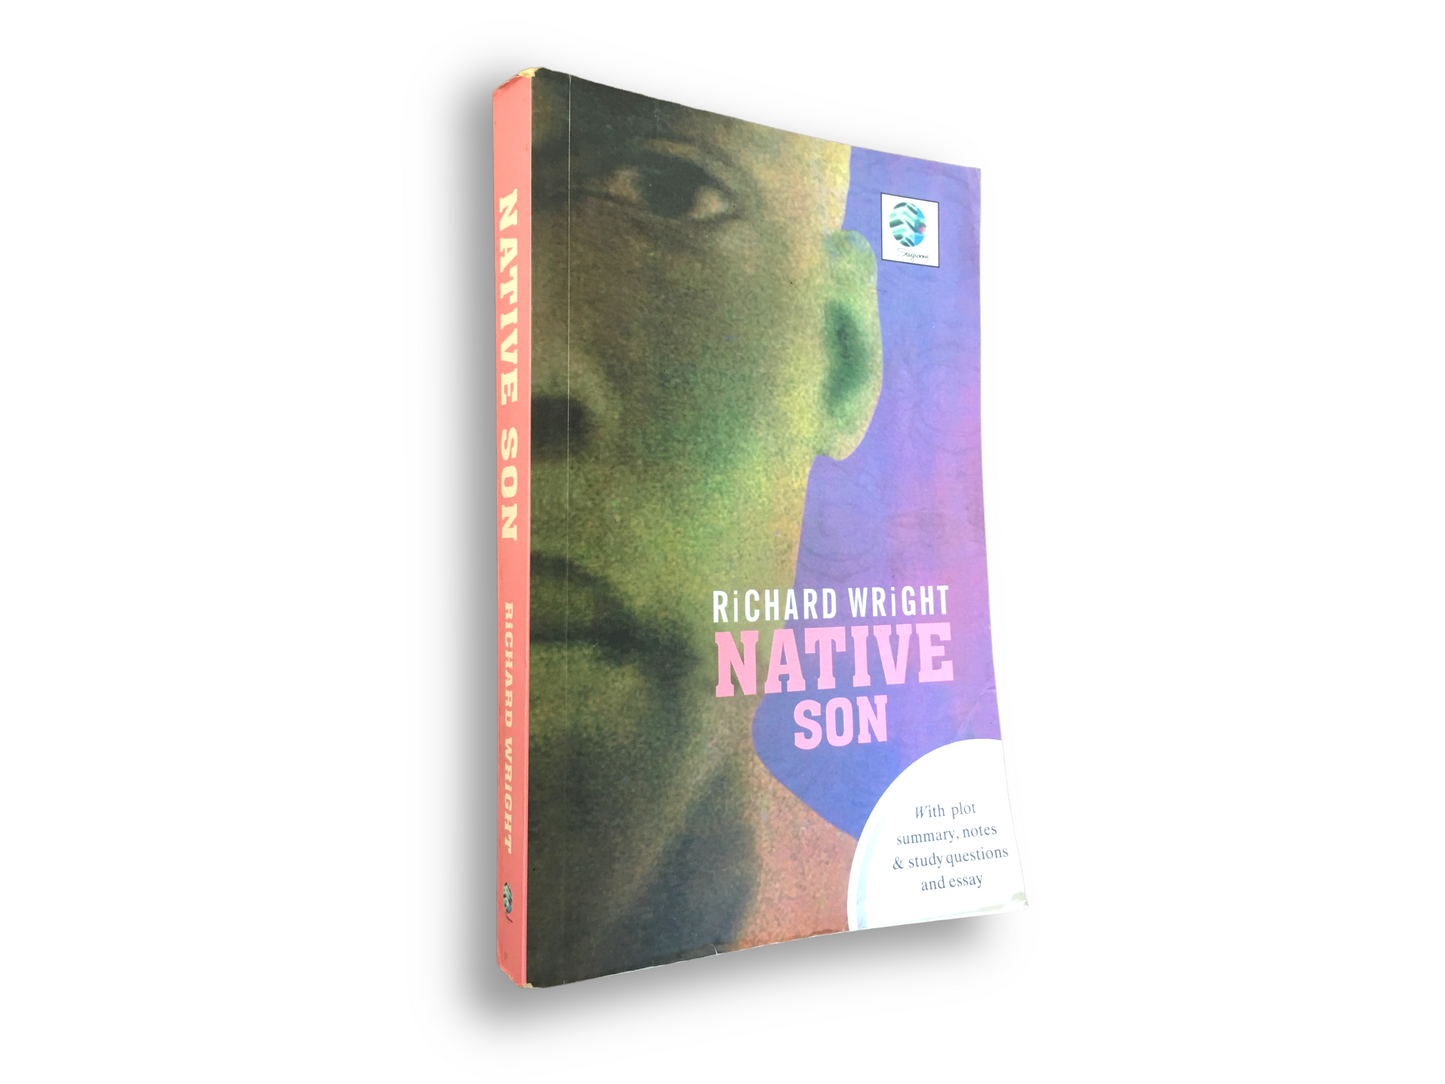 NATIVE SON by Richard Wright